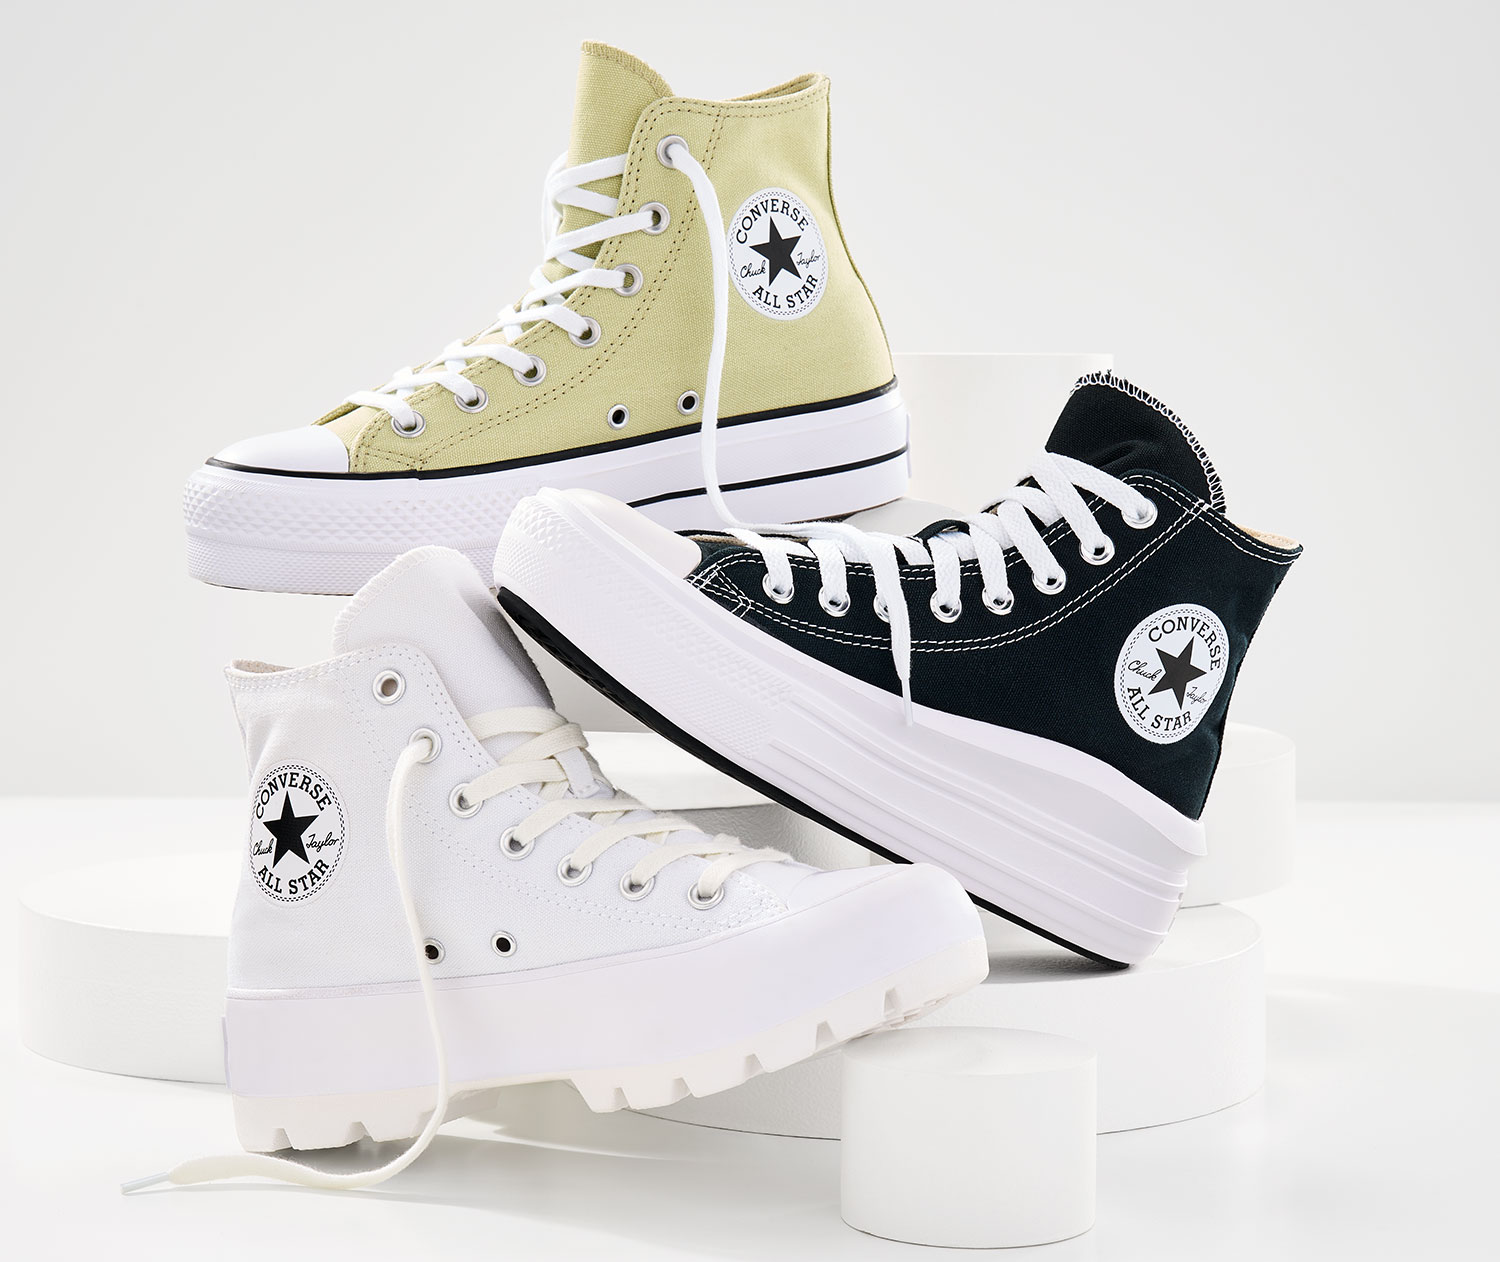 Shoes Sneakers Skater Shoes Converse Skater Shoes striped pattern casual look 